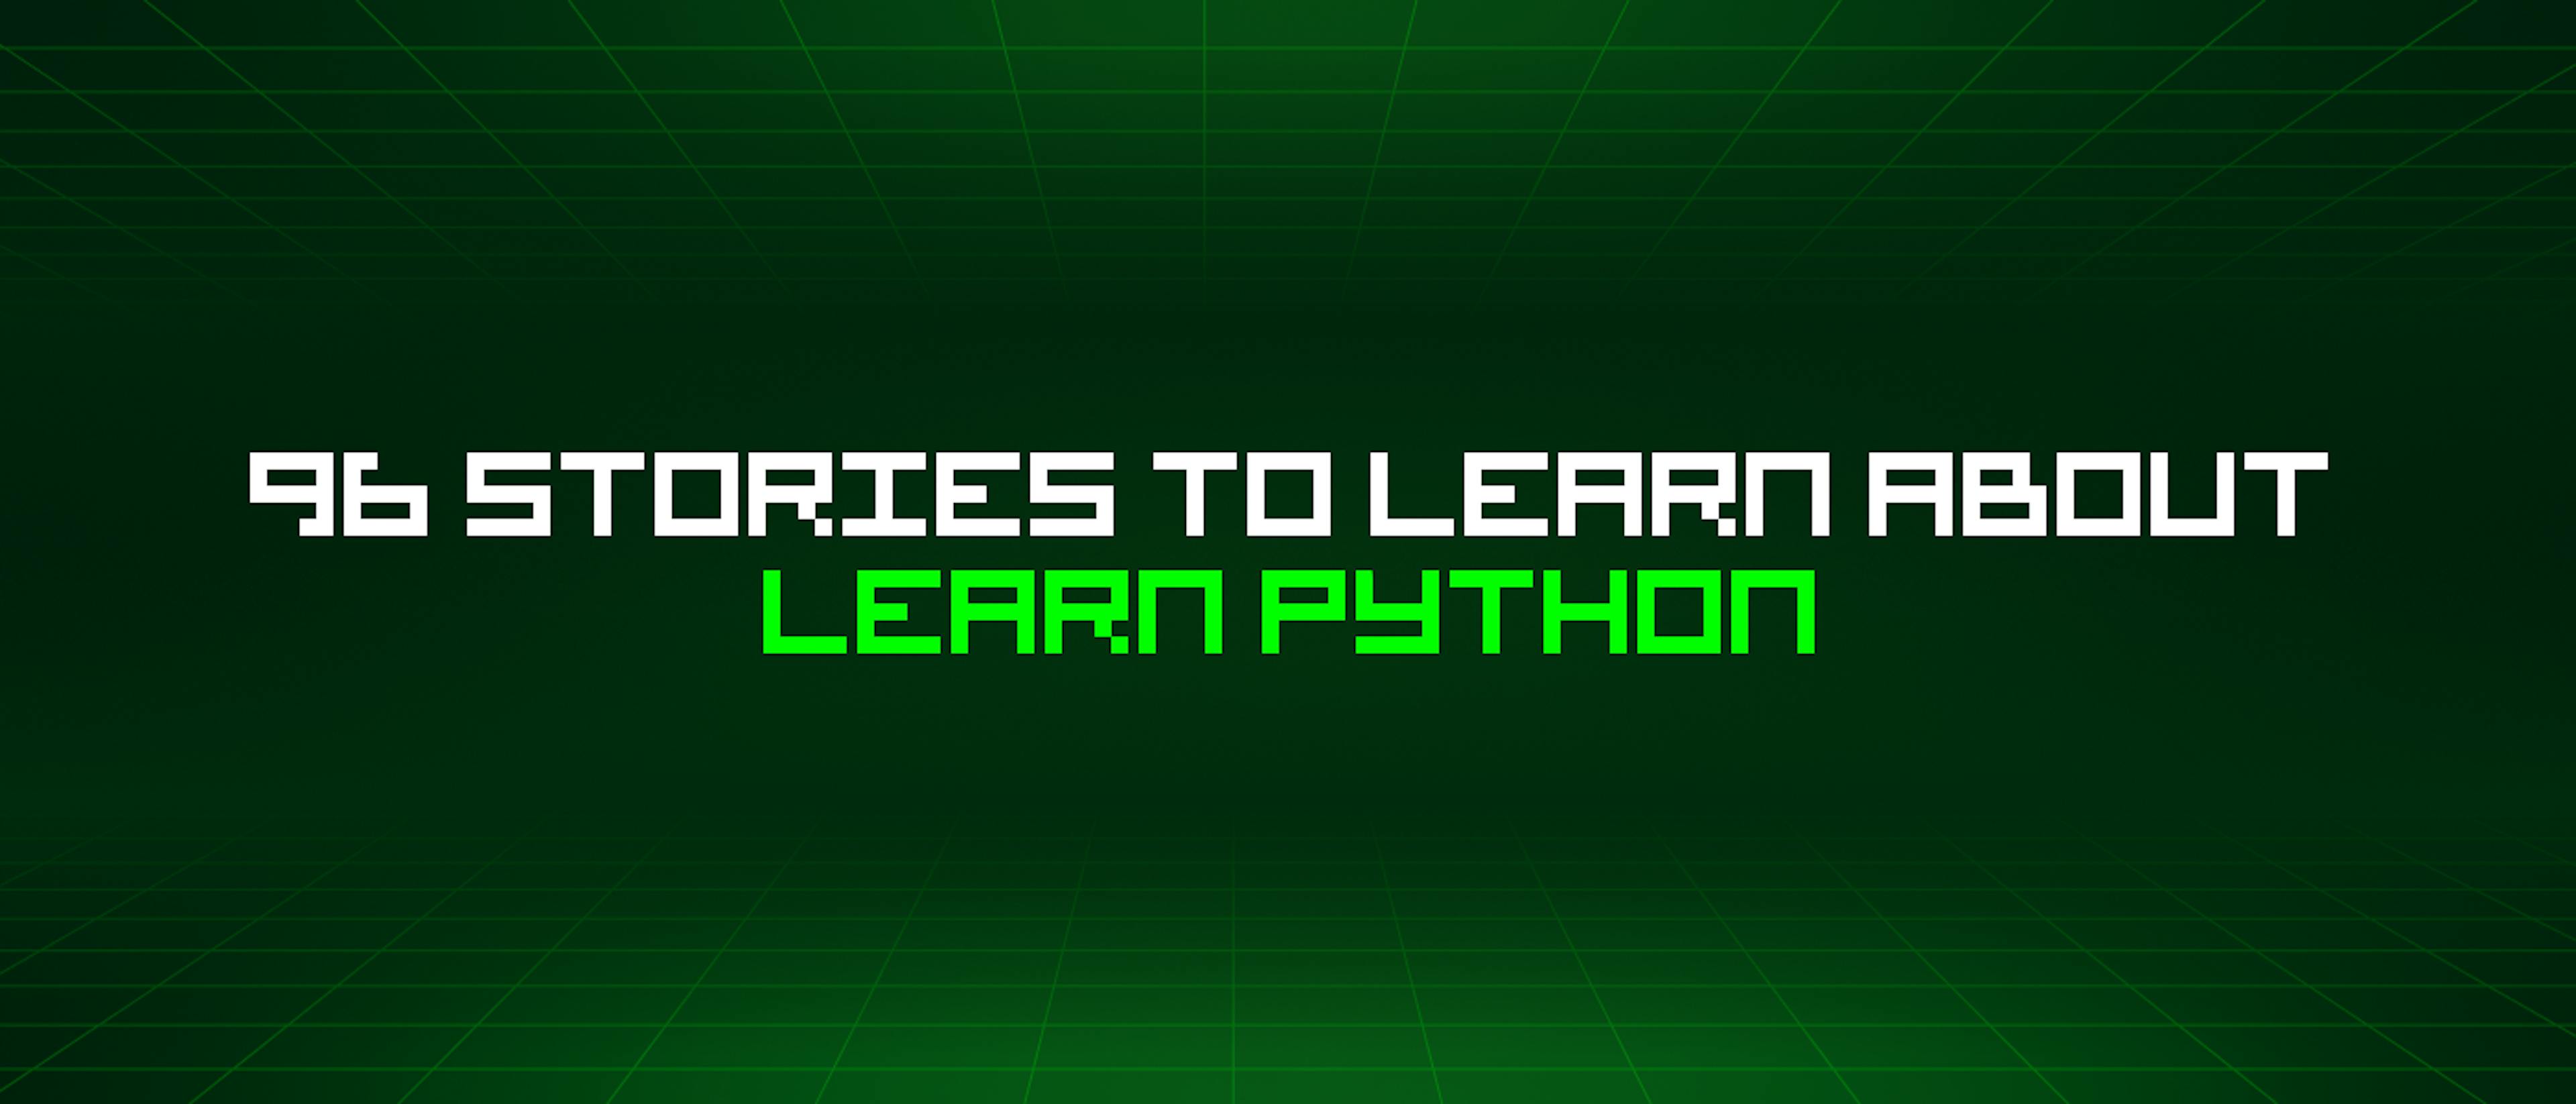 featured image - 96 Stories To Learn About Learn Python